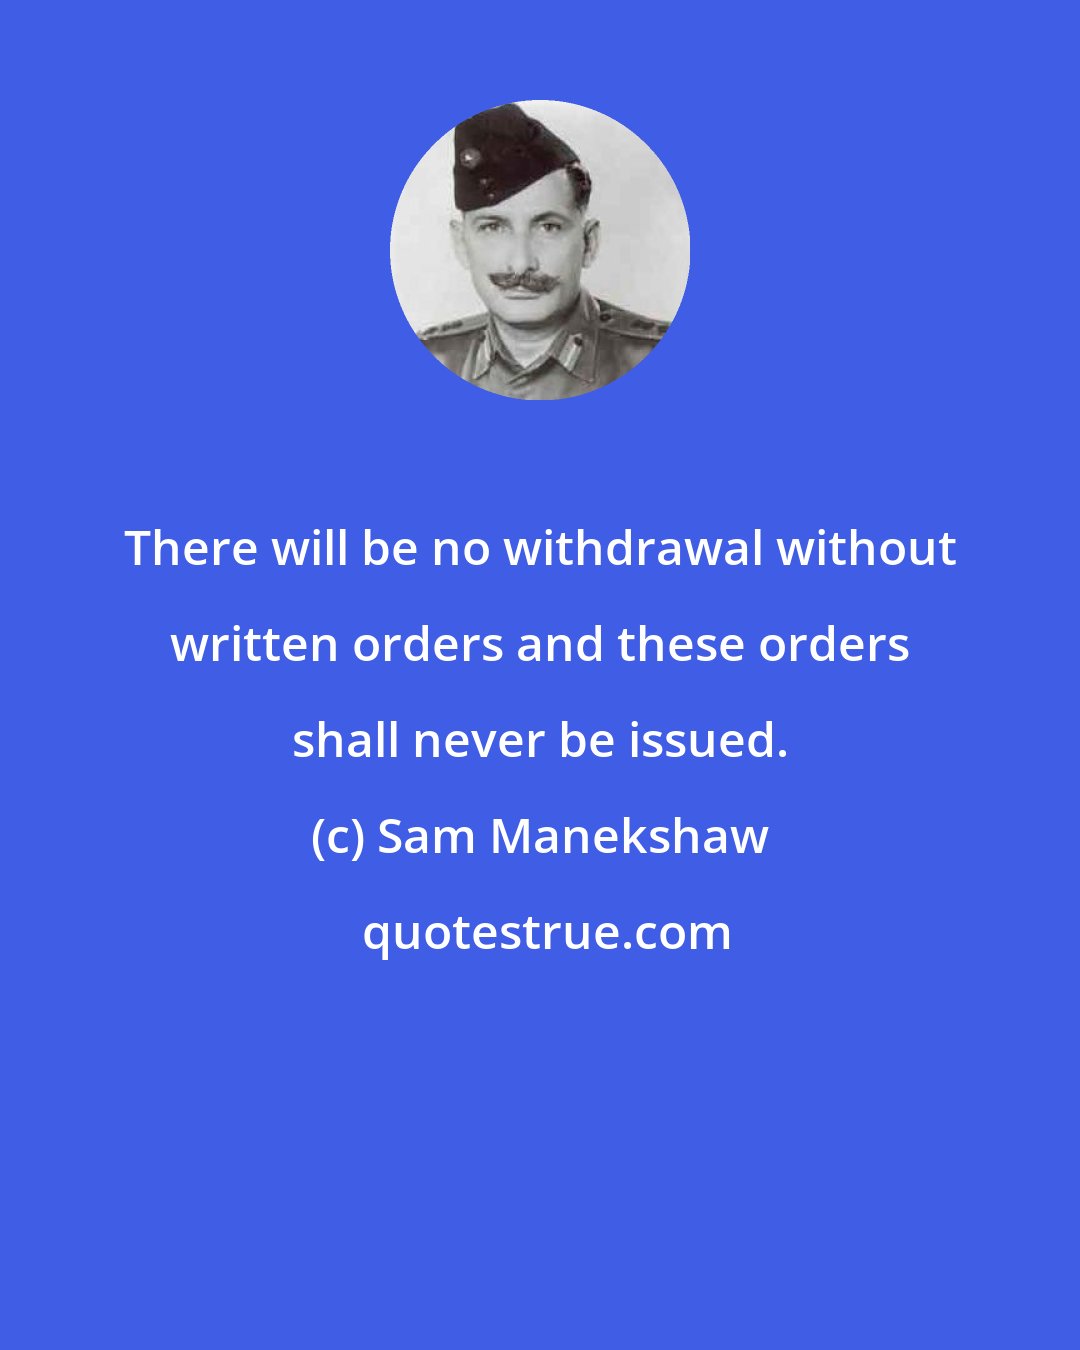 Sam Manekshaw: There will be no withdrawal without written orders and these orders shall never be issued.